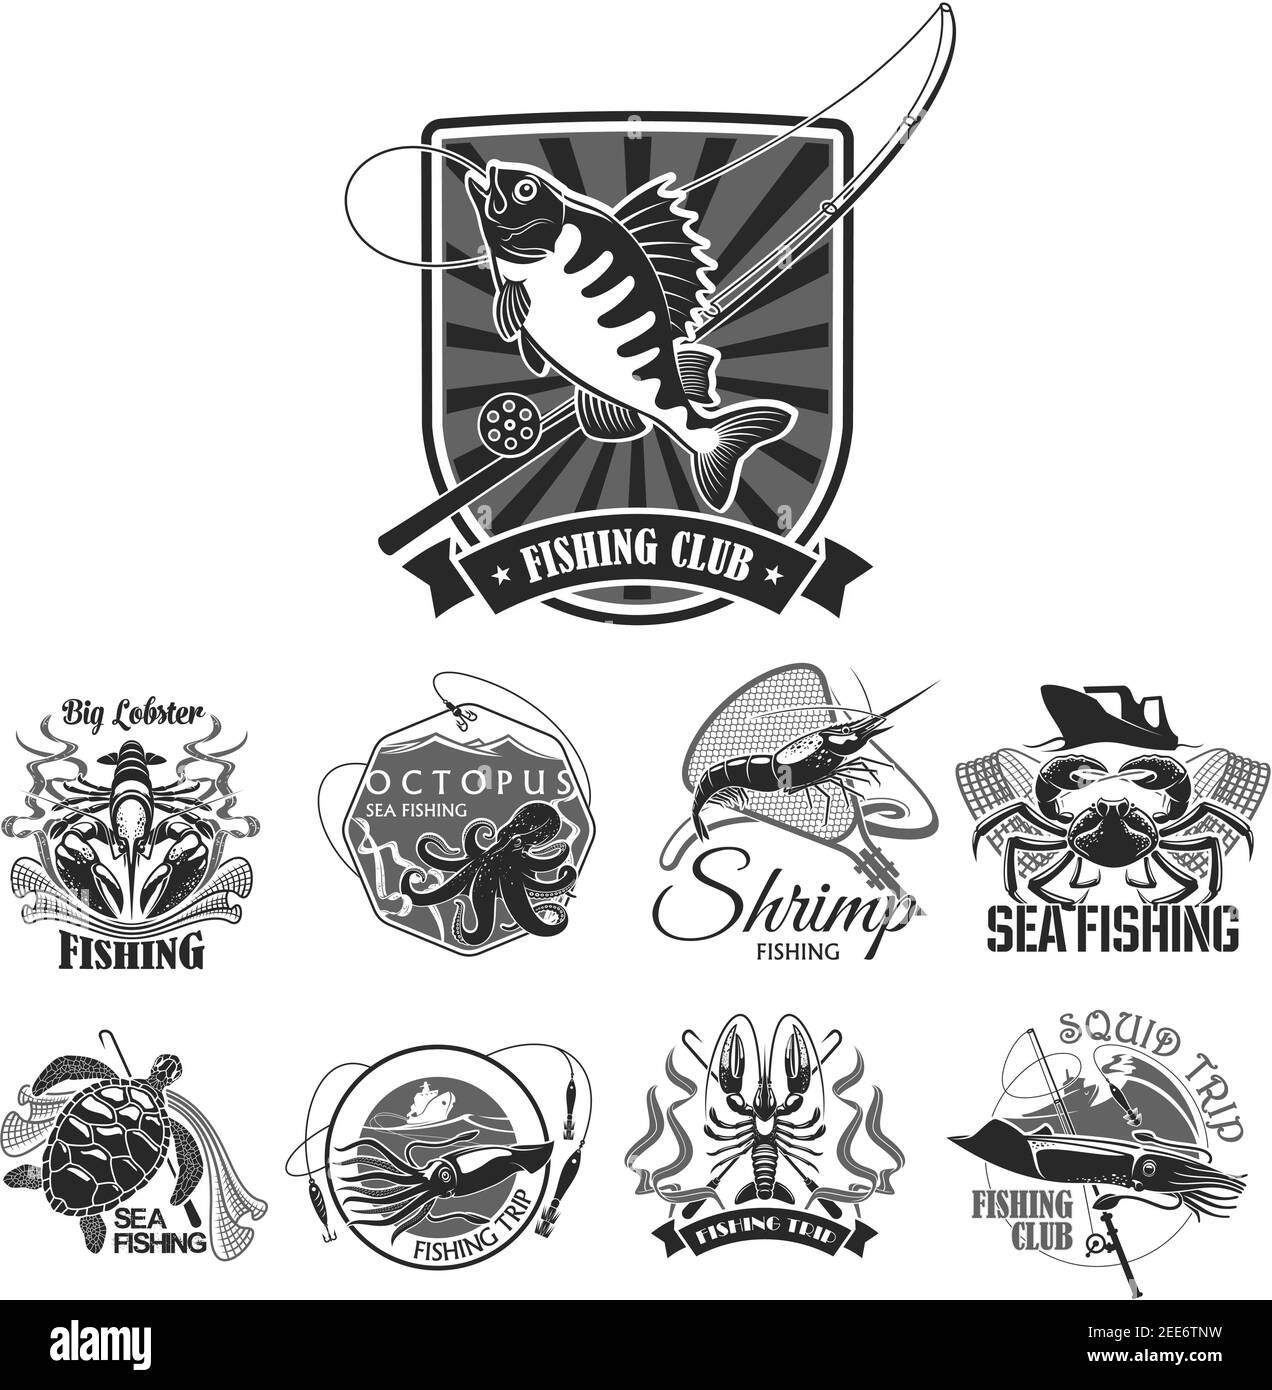 Fishing club icons of fisher badges for seafood or fish catch of perch, crab, squid or shrimp and octopus. Vector symbols of fisherman rods and net, b Stock Vector